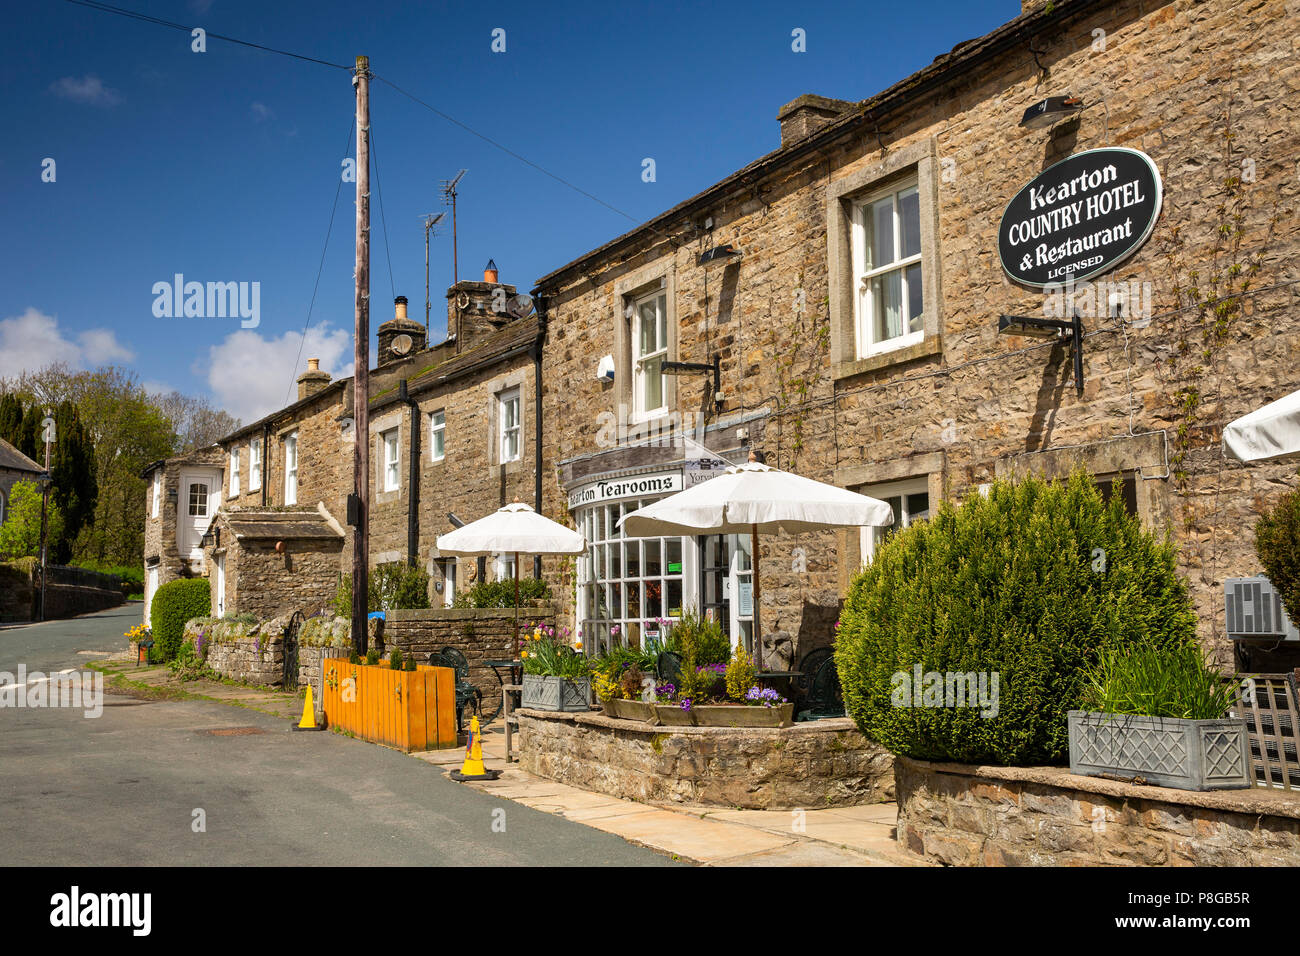 UK, England, Yorkshire, Swaledale, Thwaite, village Kearton Country House Hotel and restaurant named after pioneering nature phoographers Stock Photo